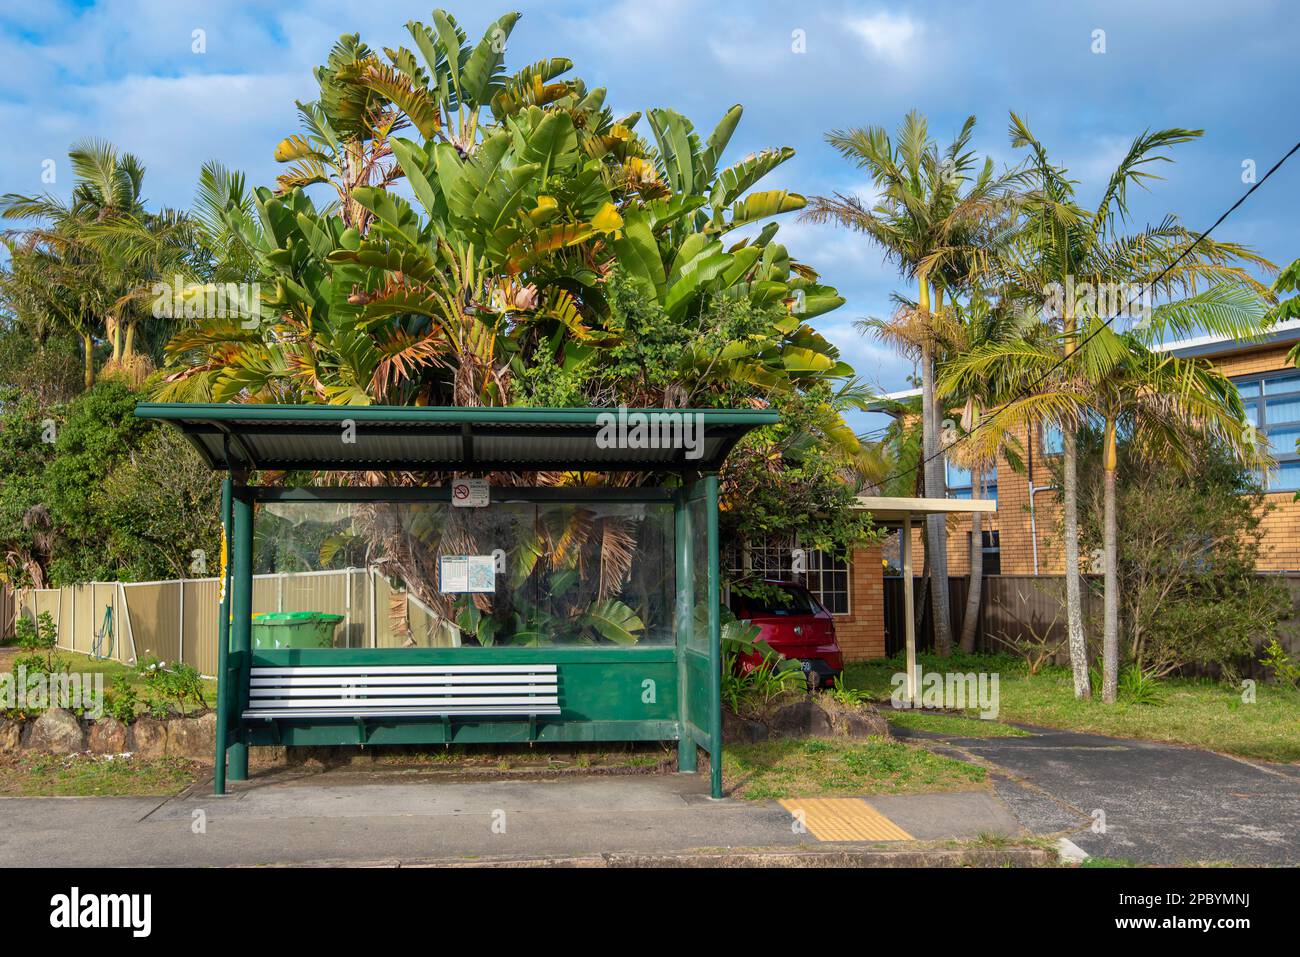 A bus stop or bus shelter at Ettalong Beach on the Central Coast of New South Wales, Australia Stock Photo